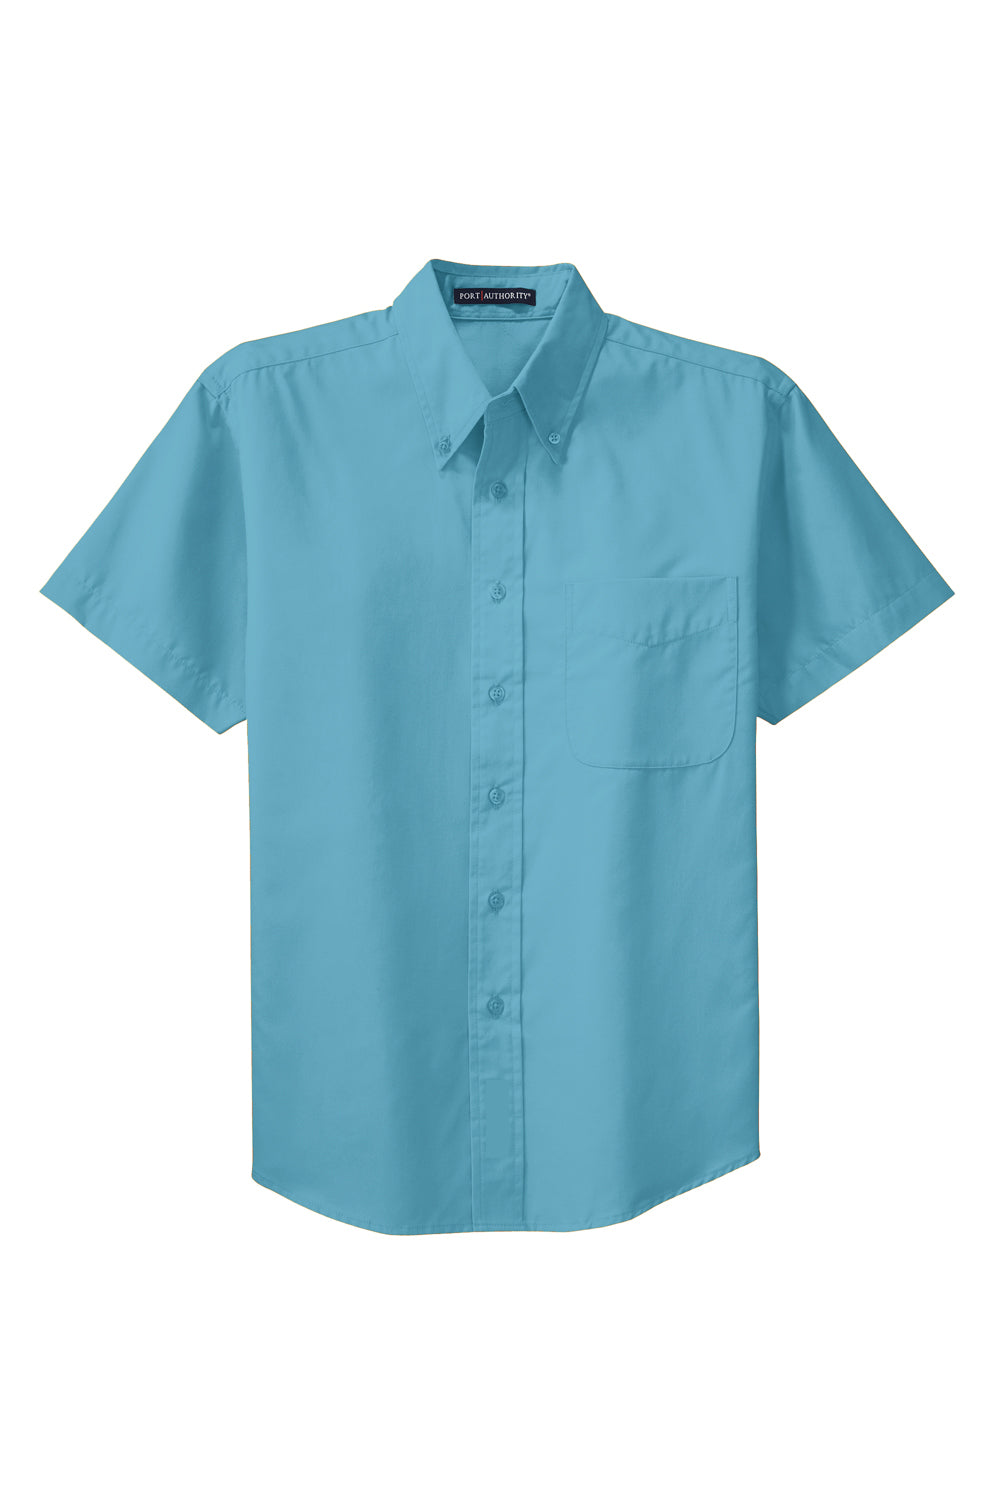 Port Authority S508/TLS508 Mens Easy Care Wrinkle Resistant Short Sleeve Button Down Shirt w/ Pocket Maui Blue Flat Front